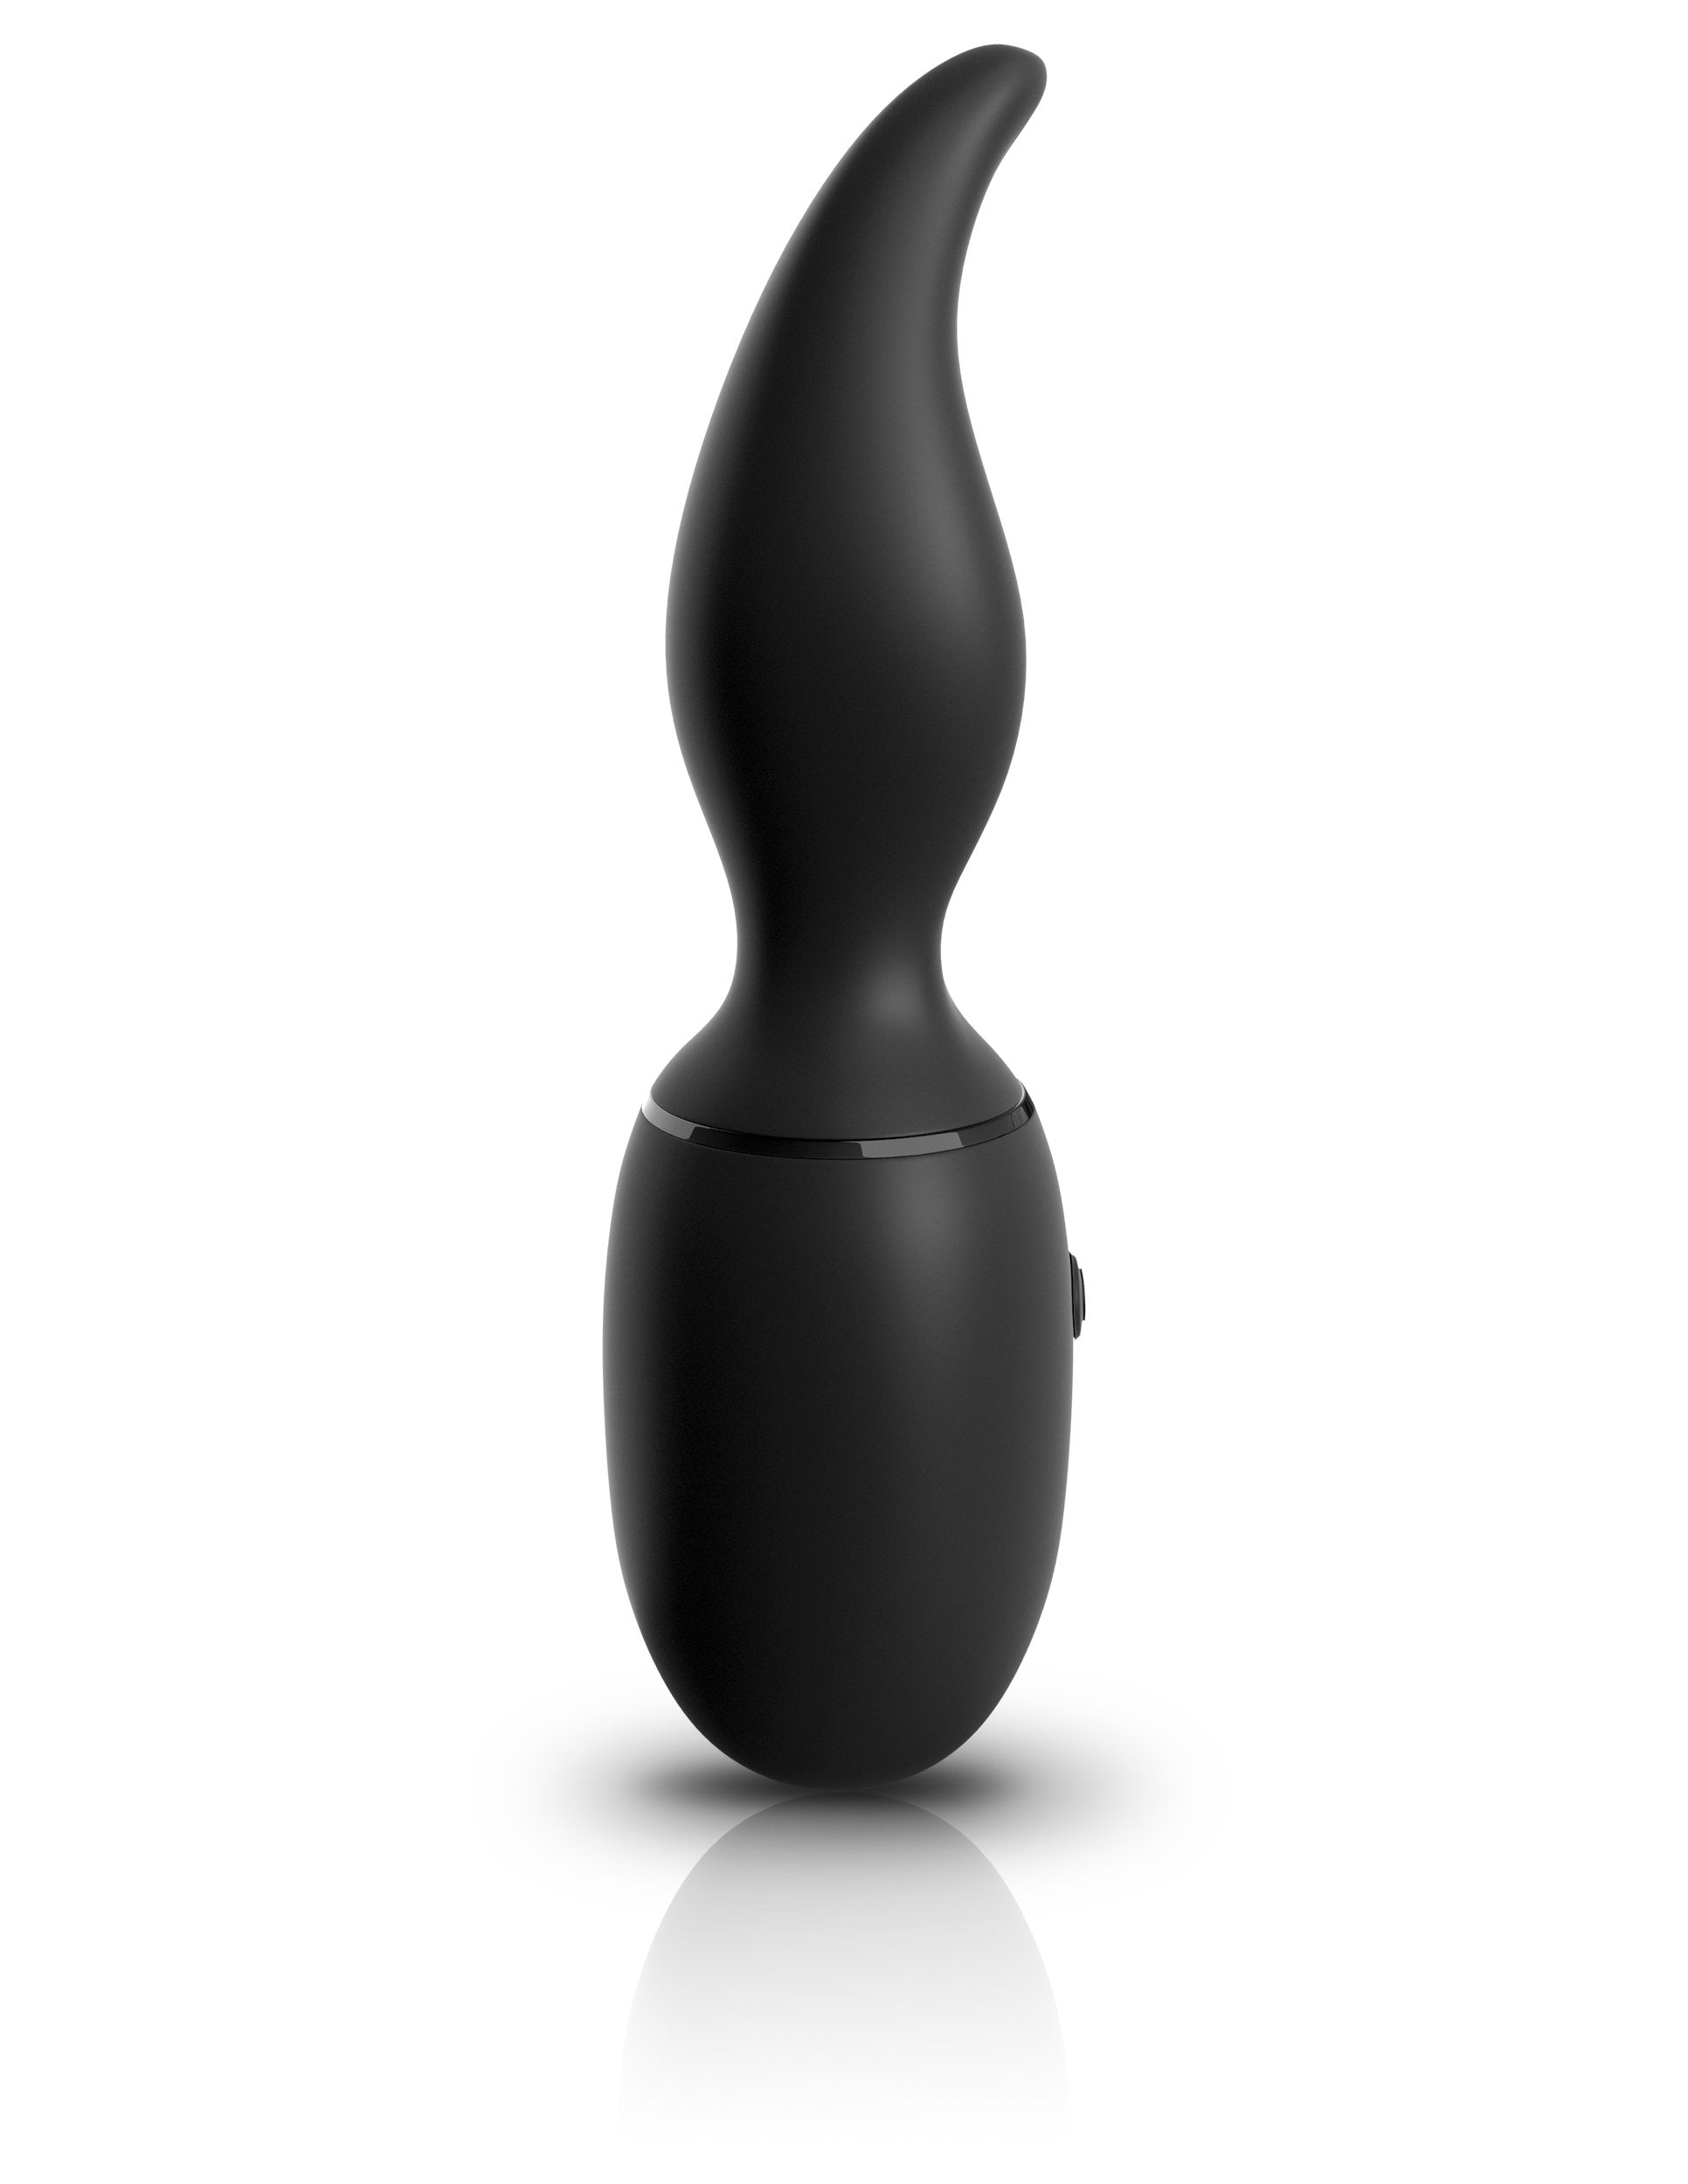 Sir Richard's Control Ultimate Silicone Rimmer Anal Vibrator